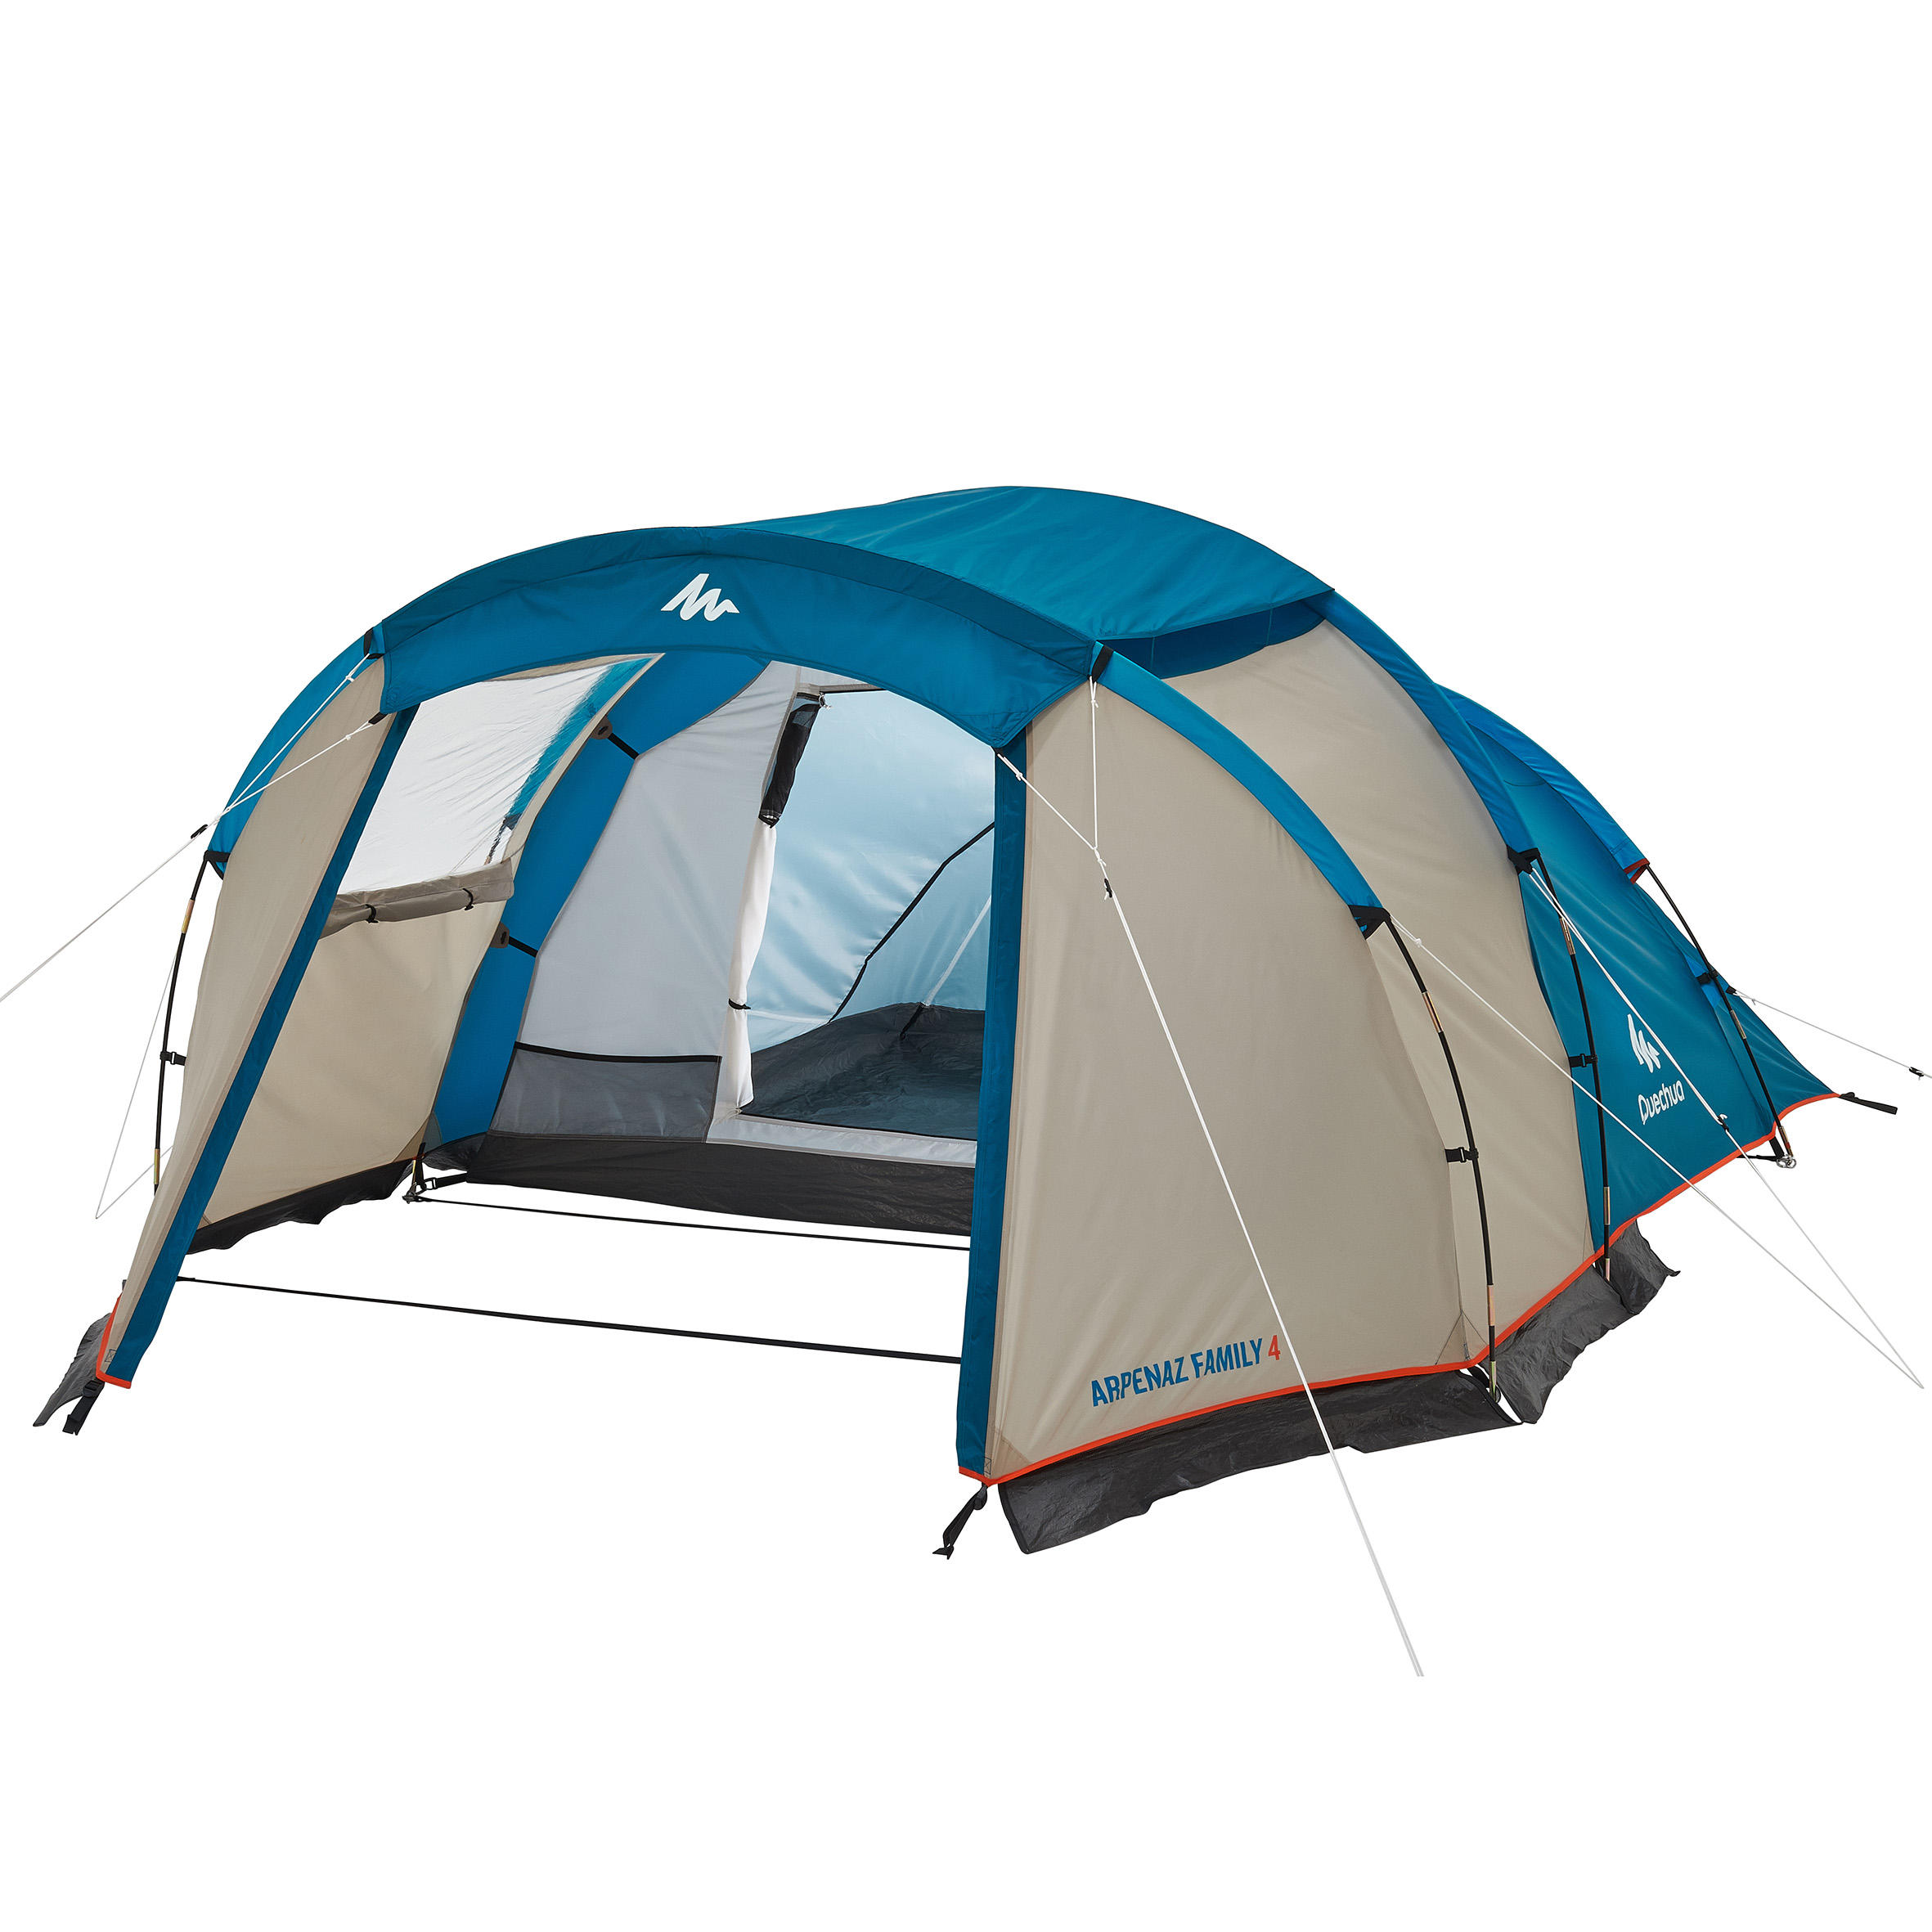 Camping tent with poles - Arpenaz 4 - 4 